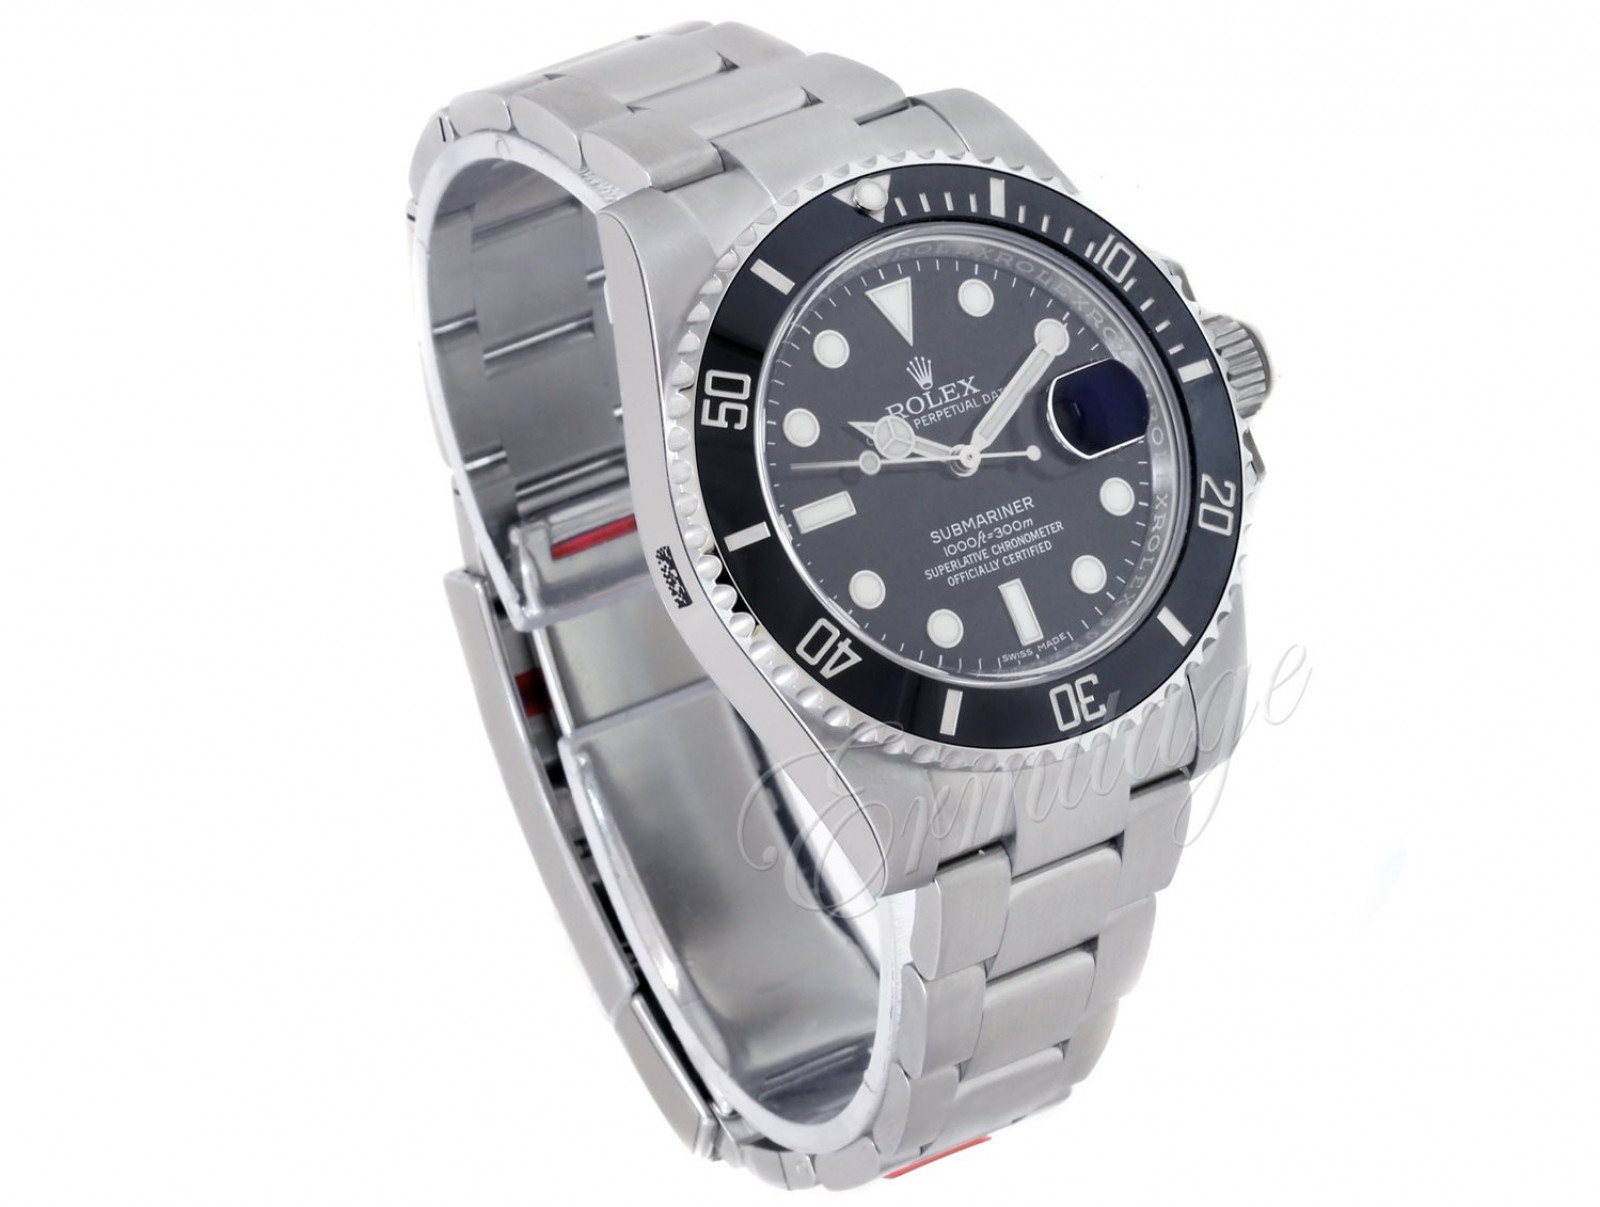 Sport Style Pre-Owned Rolex Submariner 116610